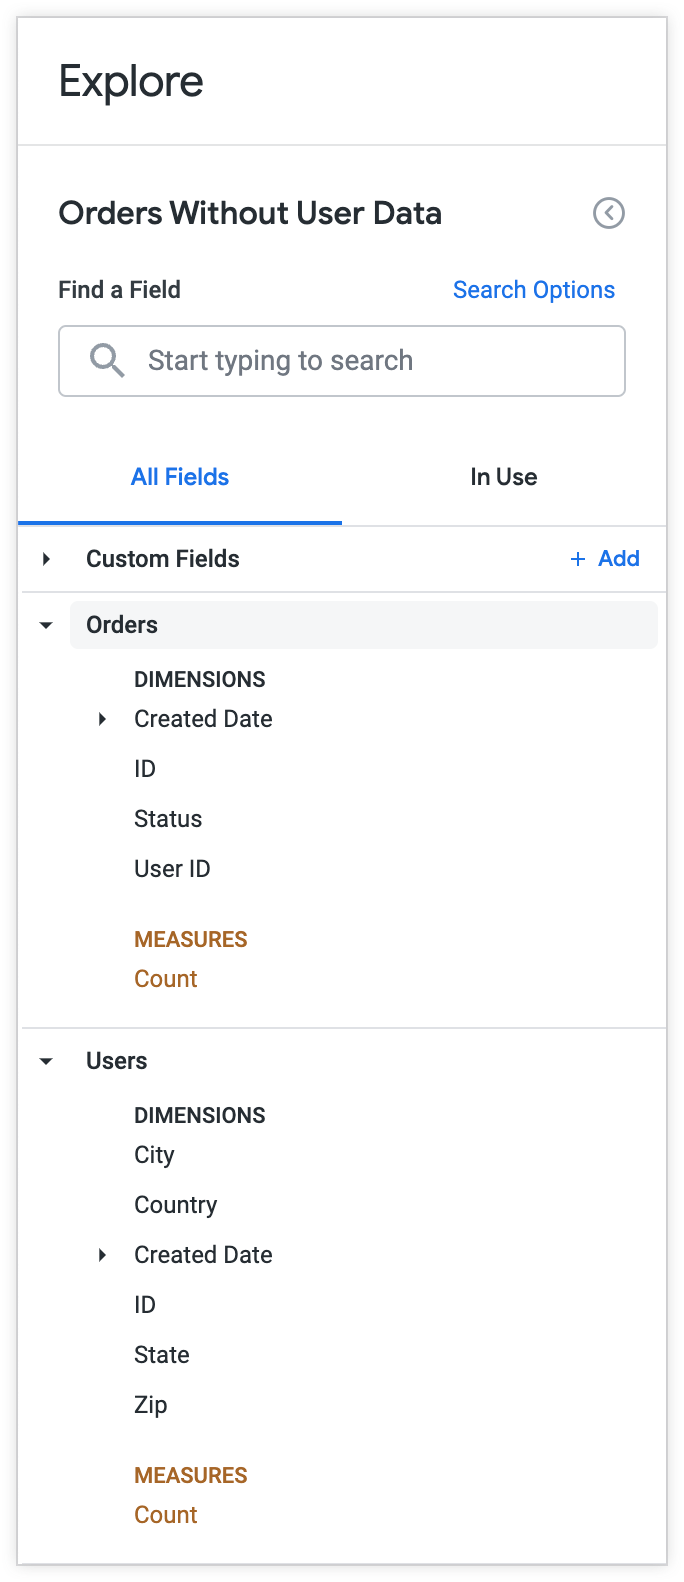 The Orders Without User Data Explore excludes the First Name, Last Name, Email, Age, and Gender fields from the Explore field picker.